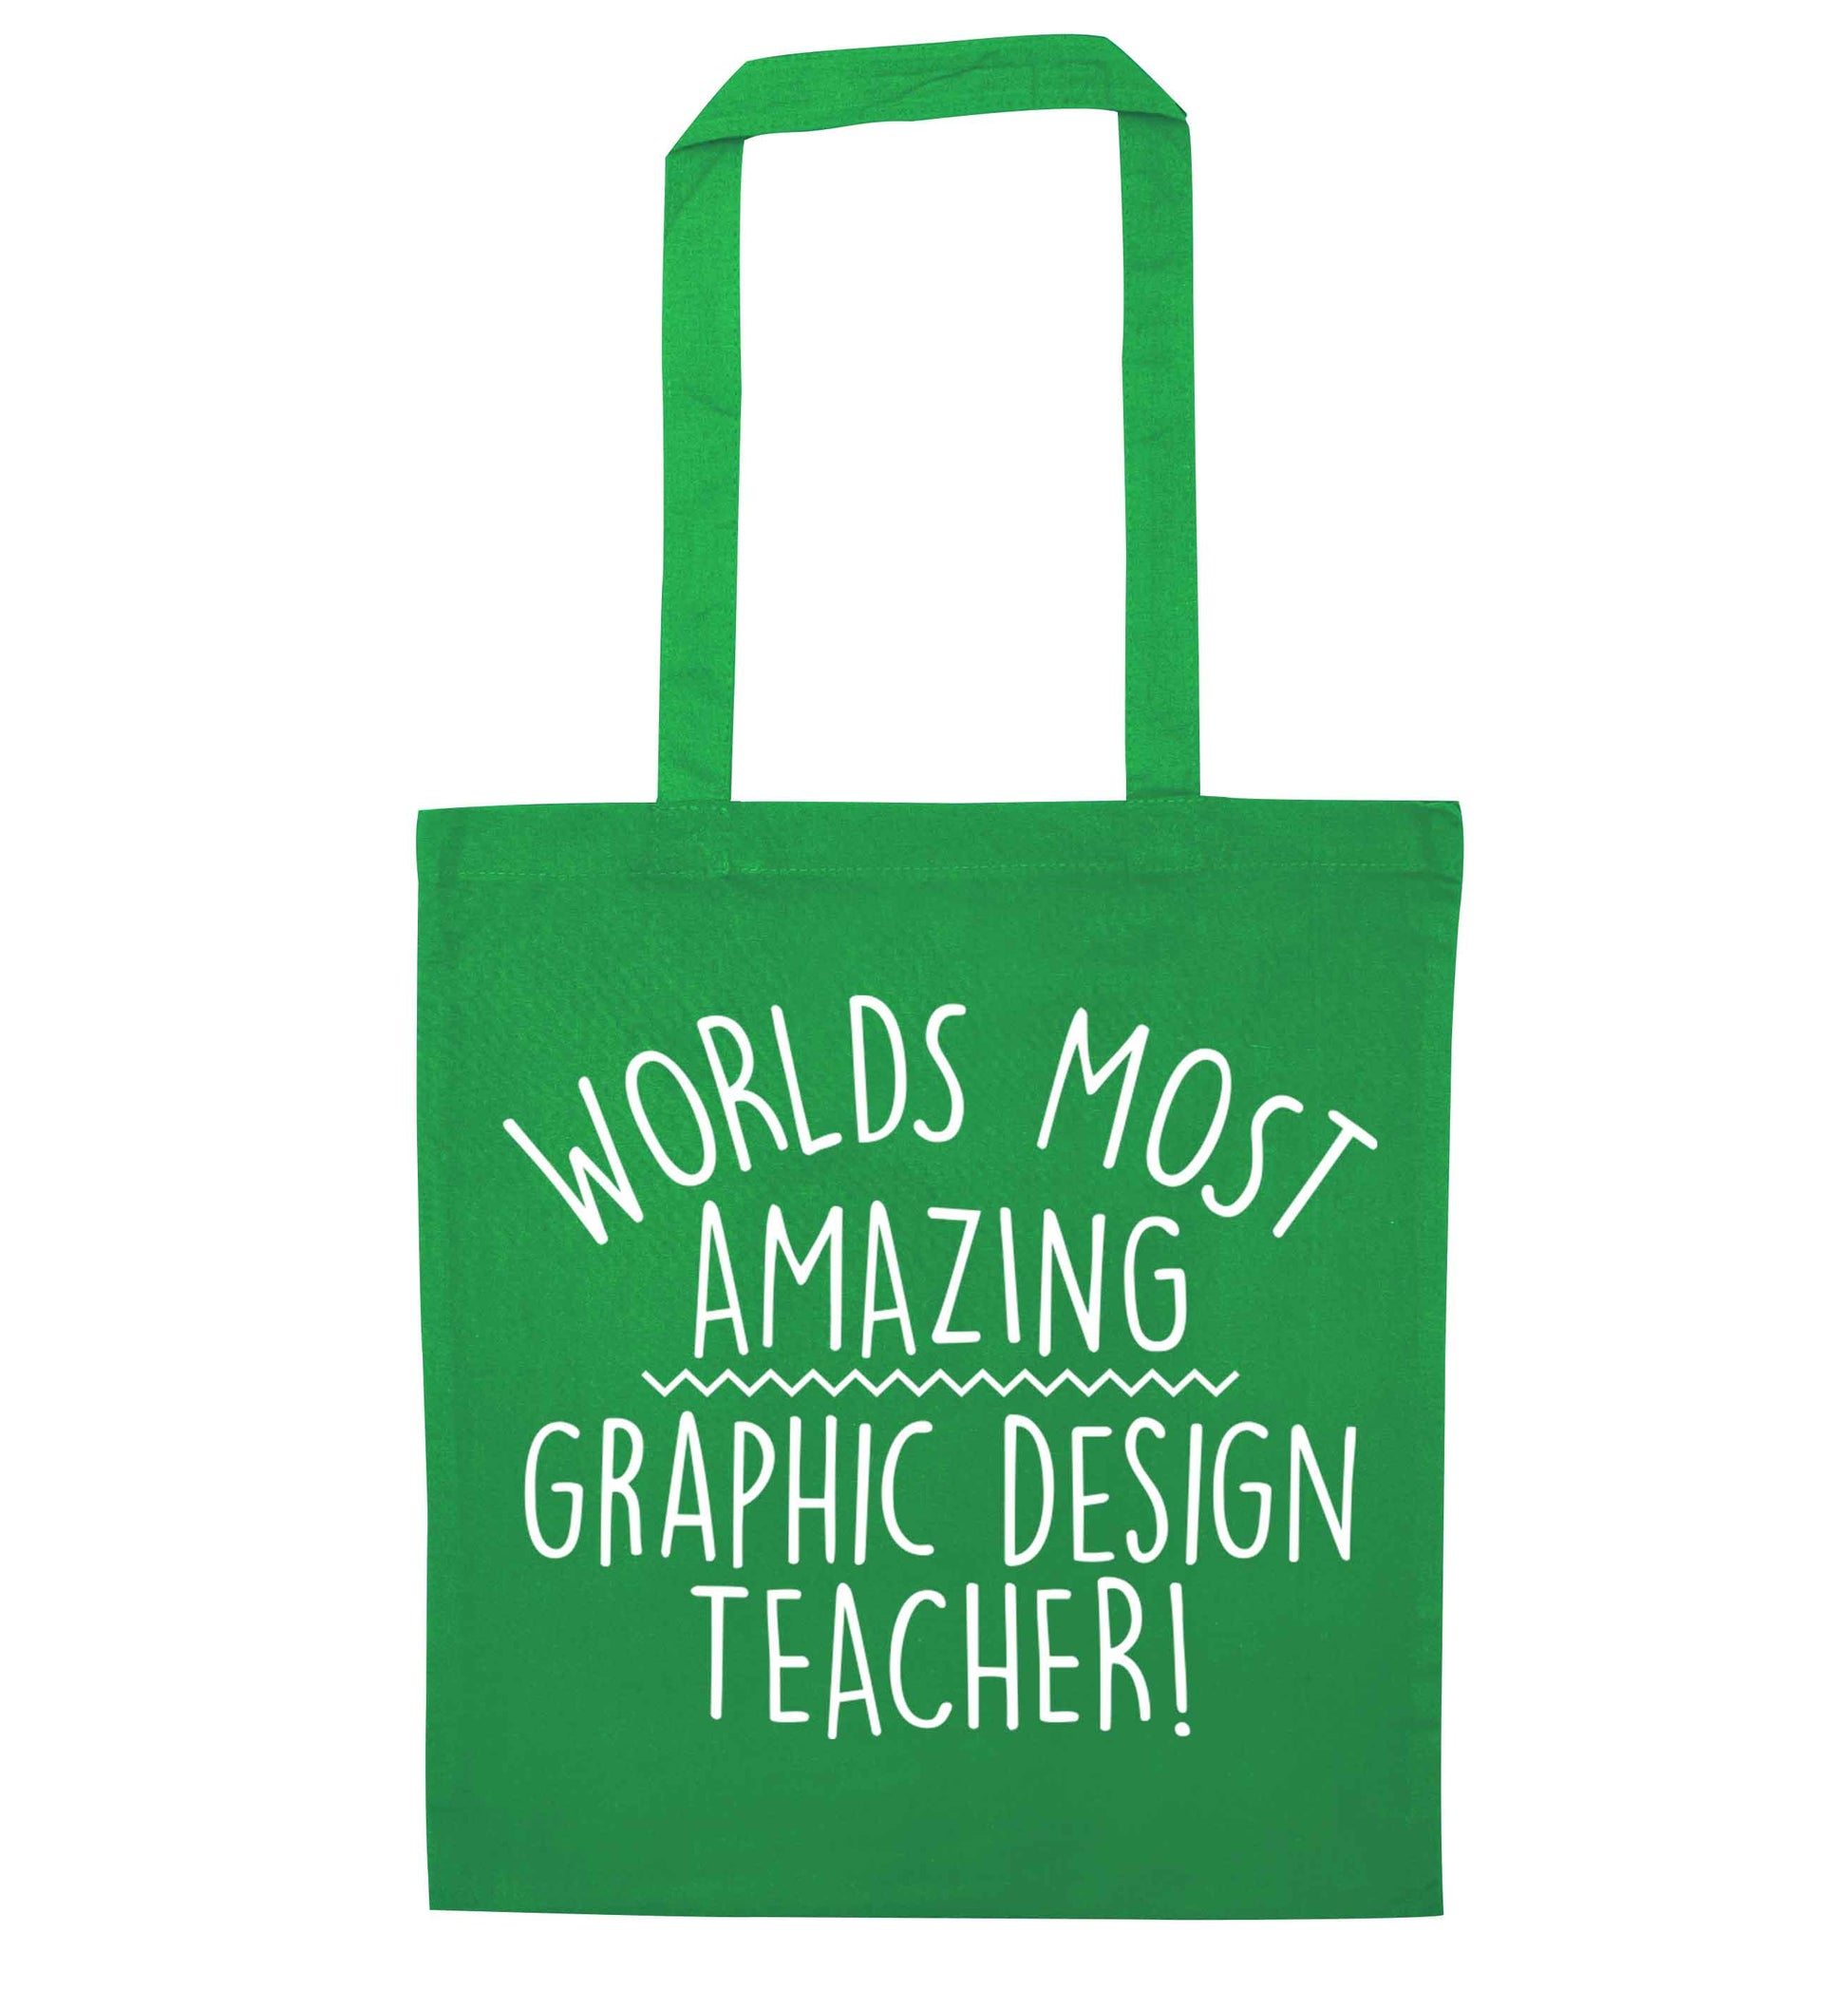 Worlds most amazing graphic design teacher green tote bag